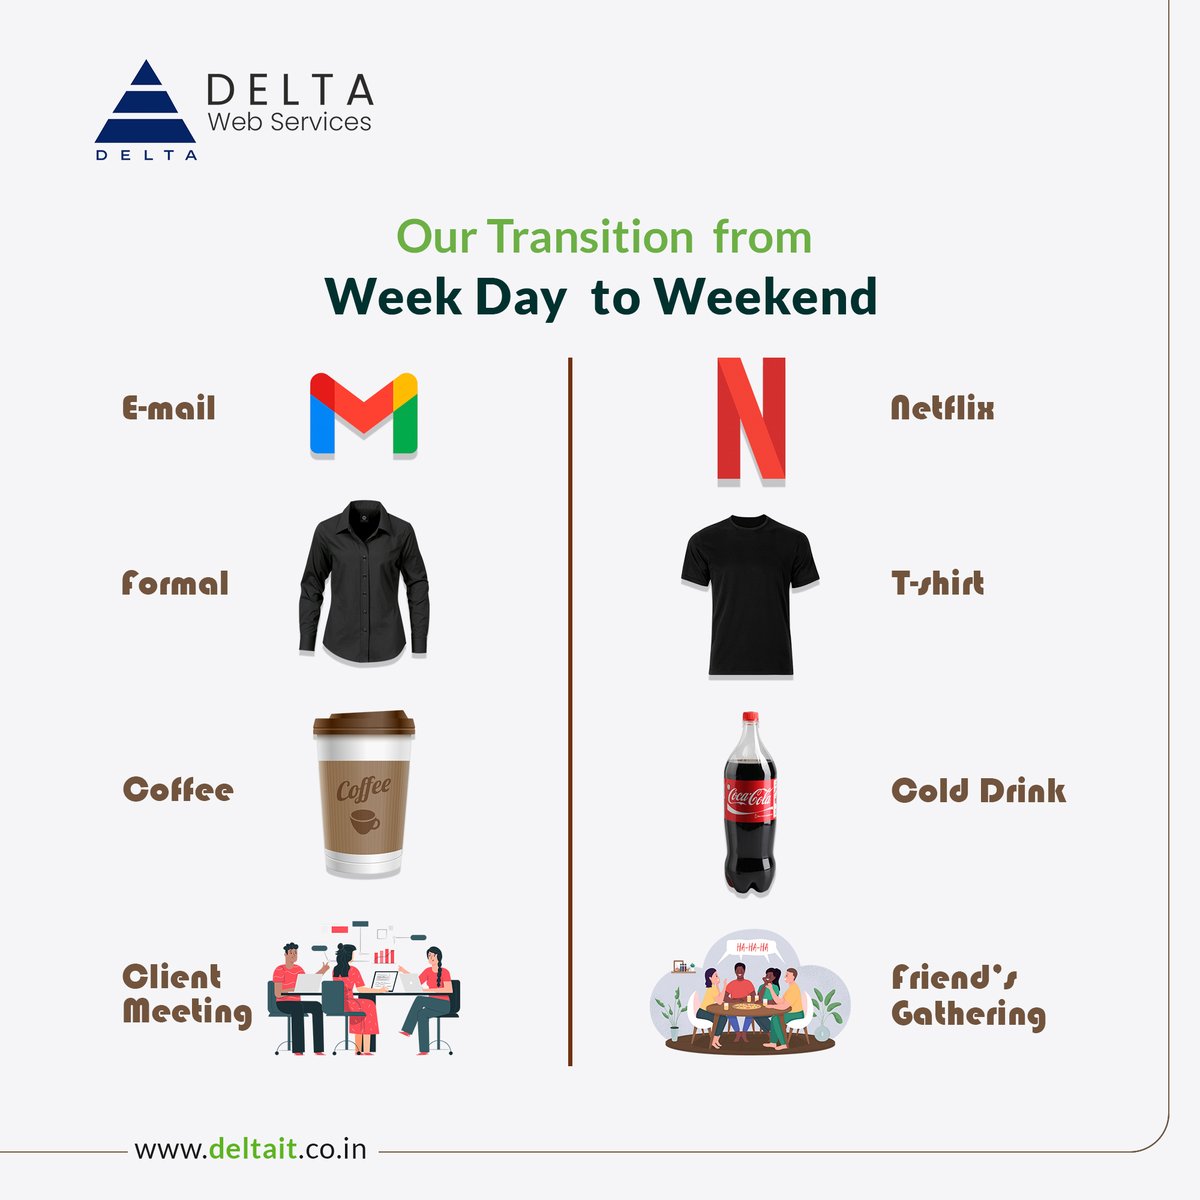 Weekdays teach us to hustle; weekends teach us to savor.
Balancing both is an art form.

#weekdays #weekends #weekdaysvsweekends #NoMoreMondayBlues #followingthetrend #motivationoftheday #opportunity #mindset #motivation #innovation #unique #different #success #inspiration #goals